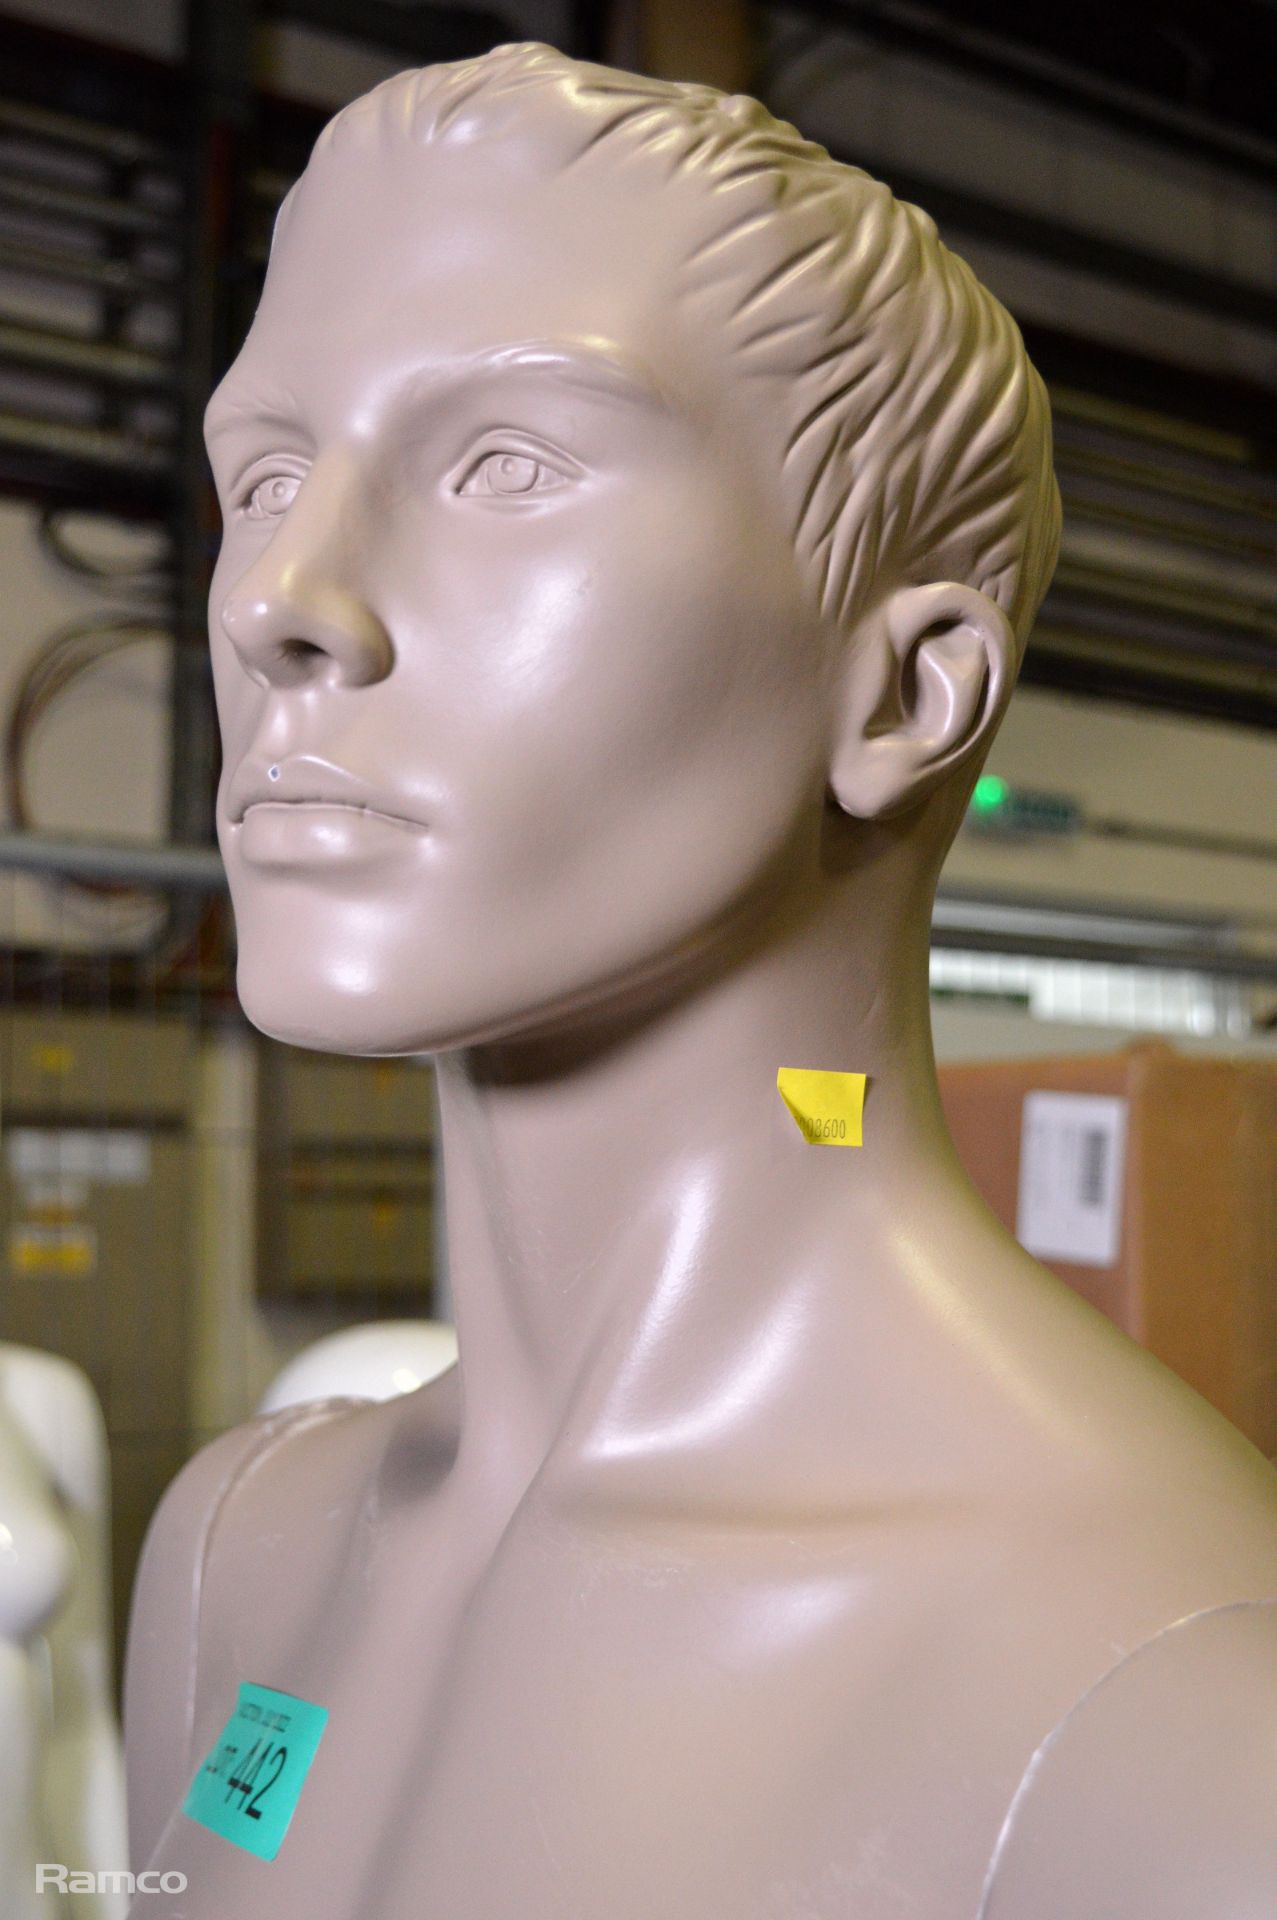 Display Mannequin - male full body - Image 2 of 2